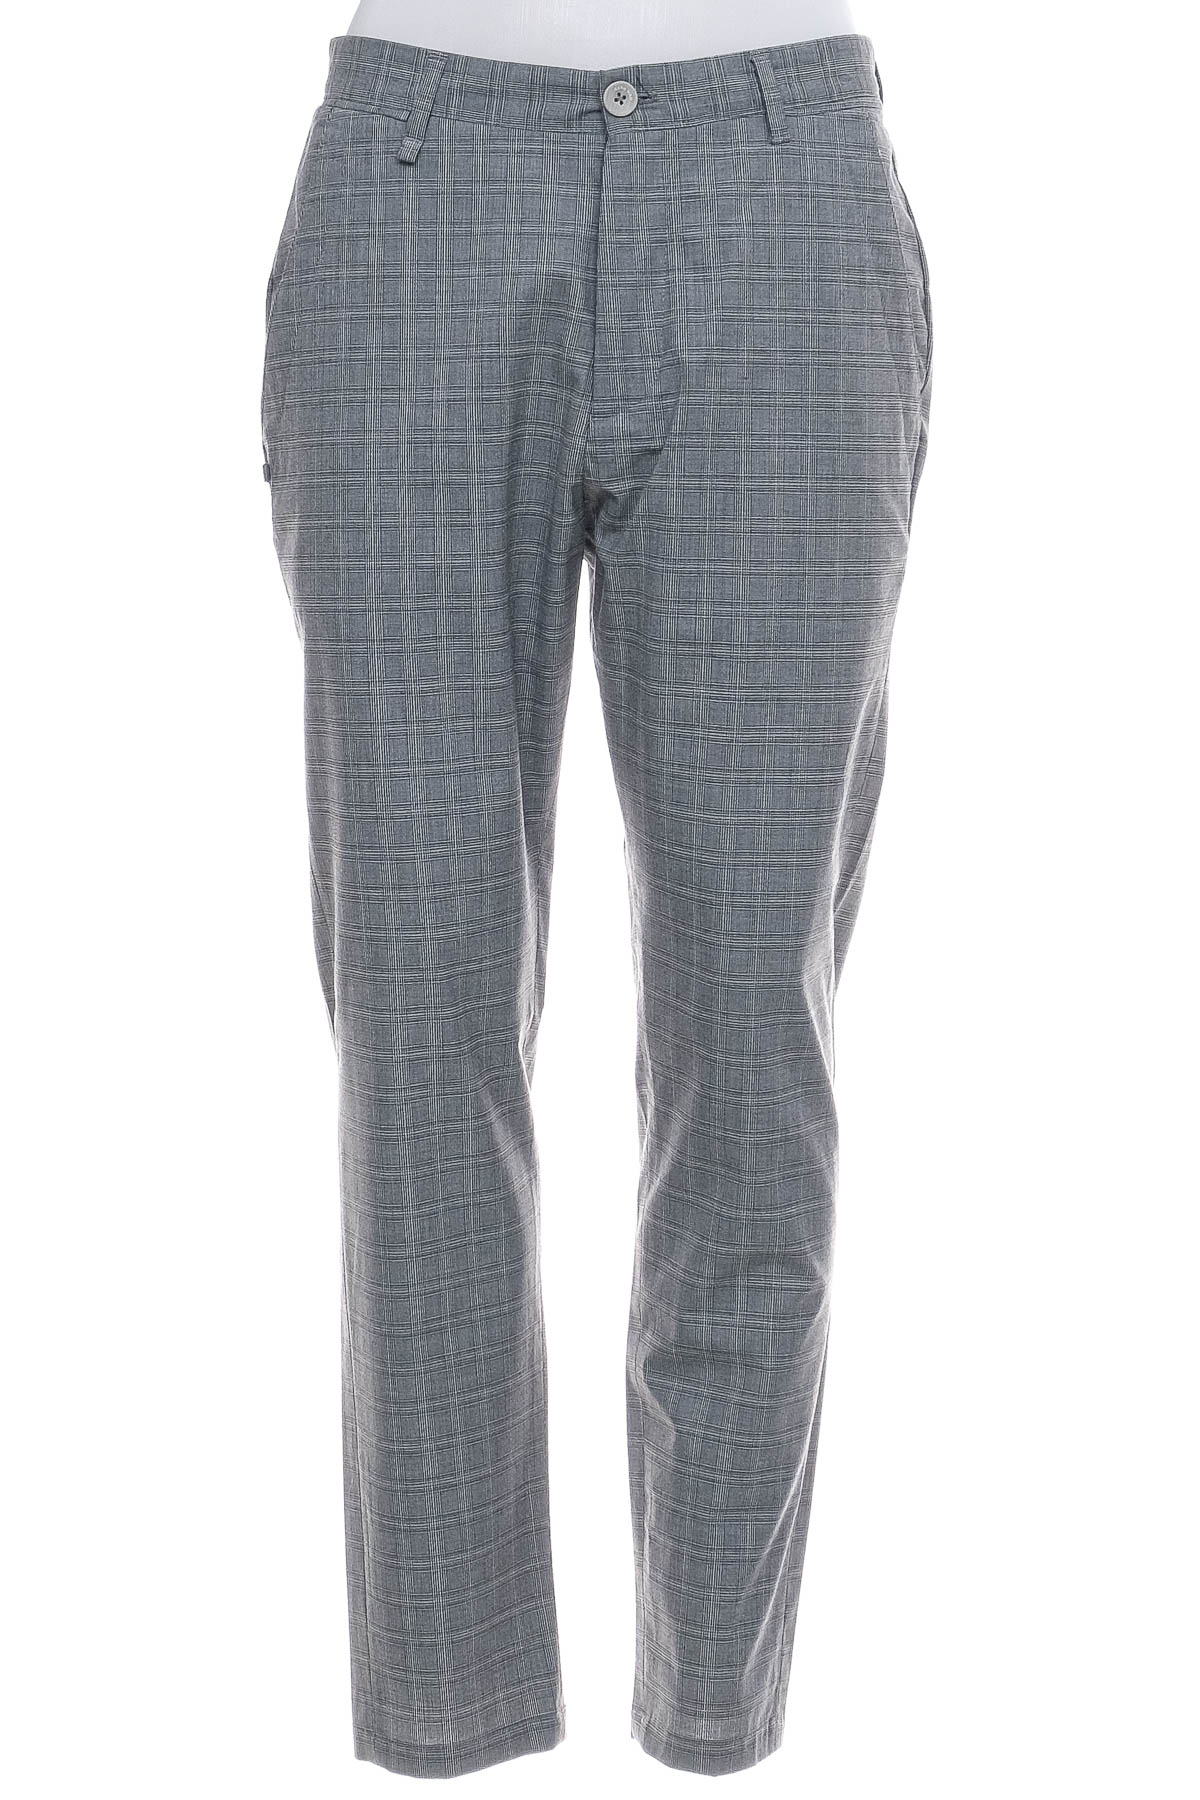 Viggo thierry check suit pants in brown | ASOS